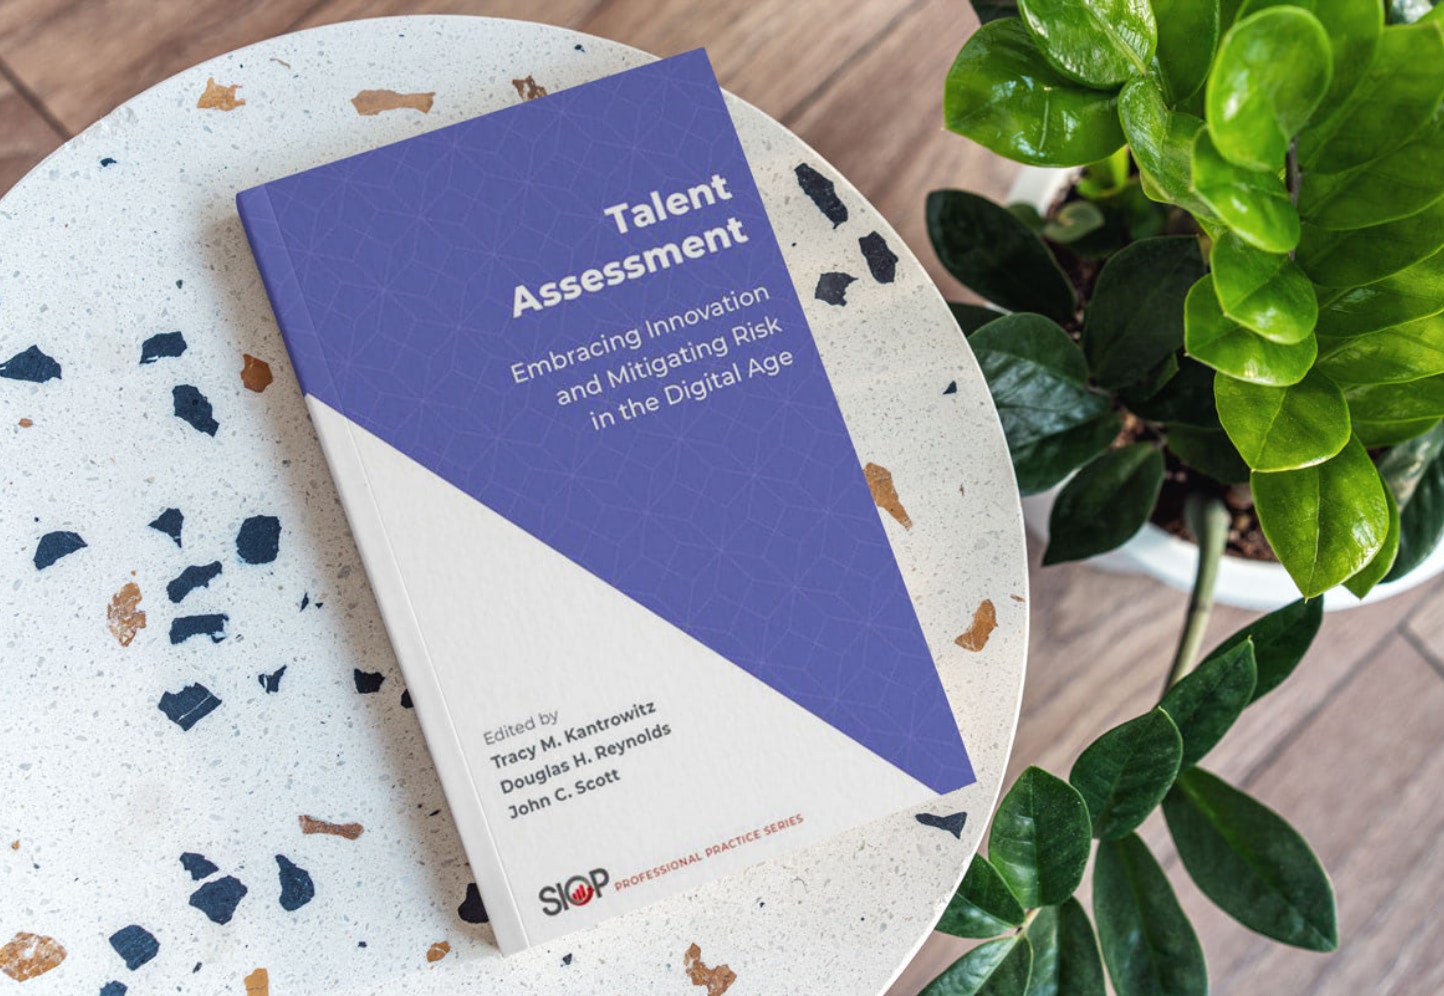 A book sits on a table, next to a green plant. The title of the book is Talent Assessment.